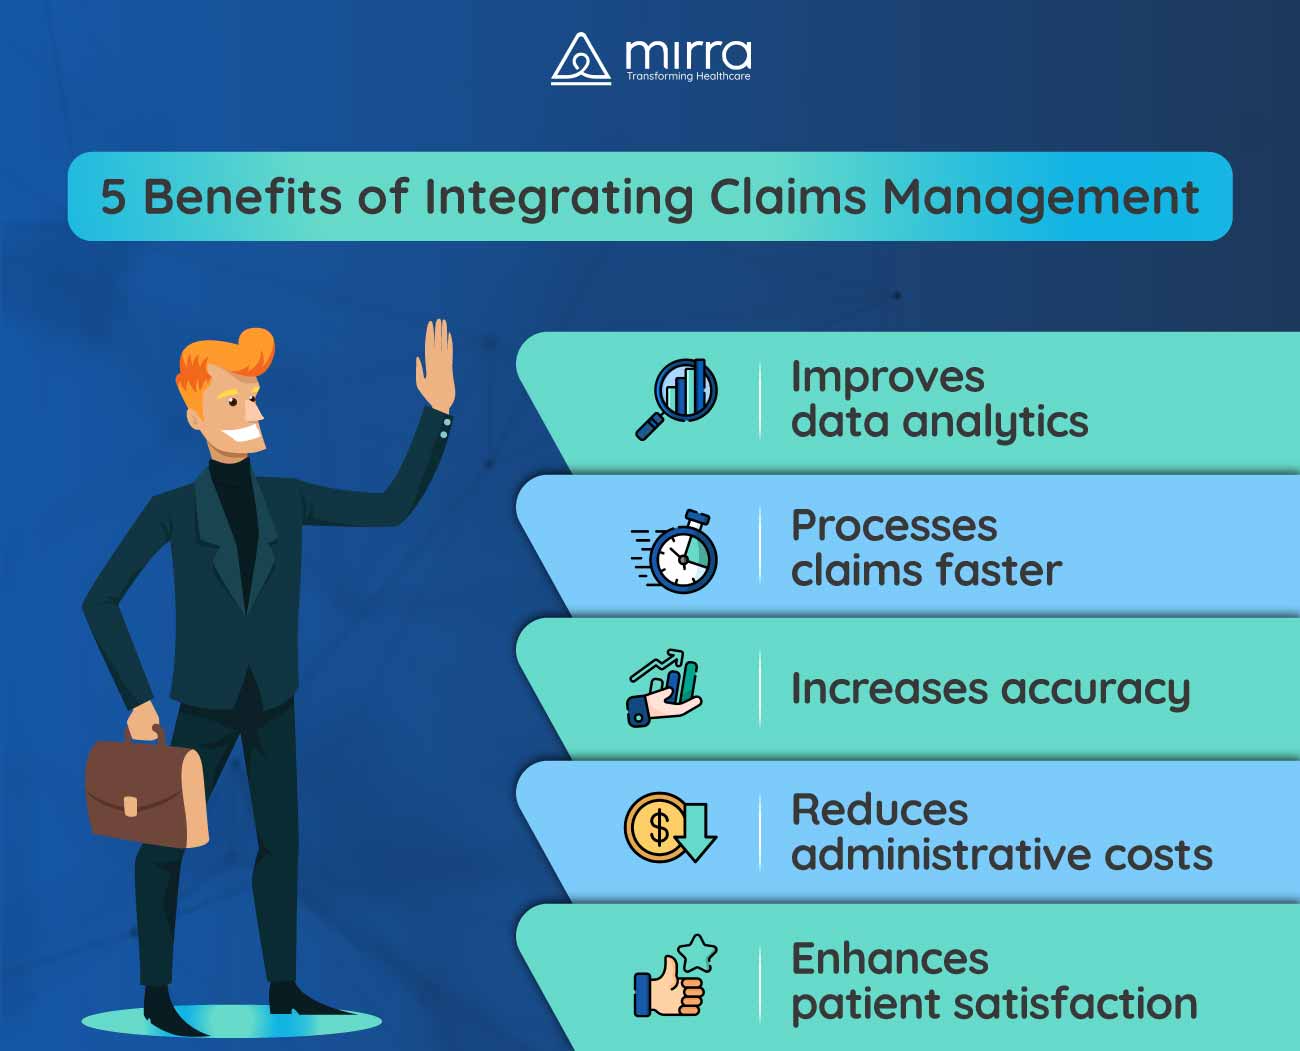 5 Benefits of Integrating Claims Management